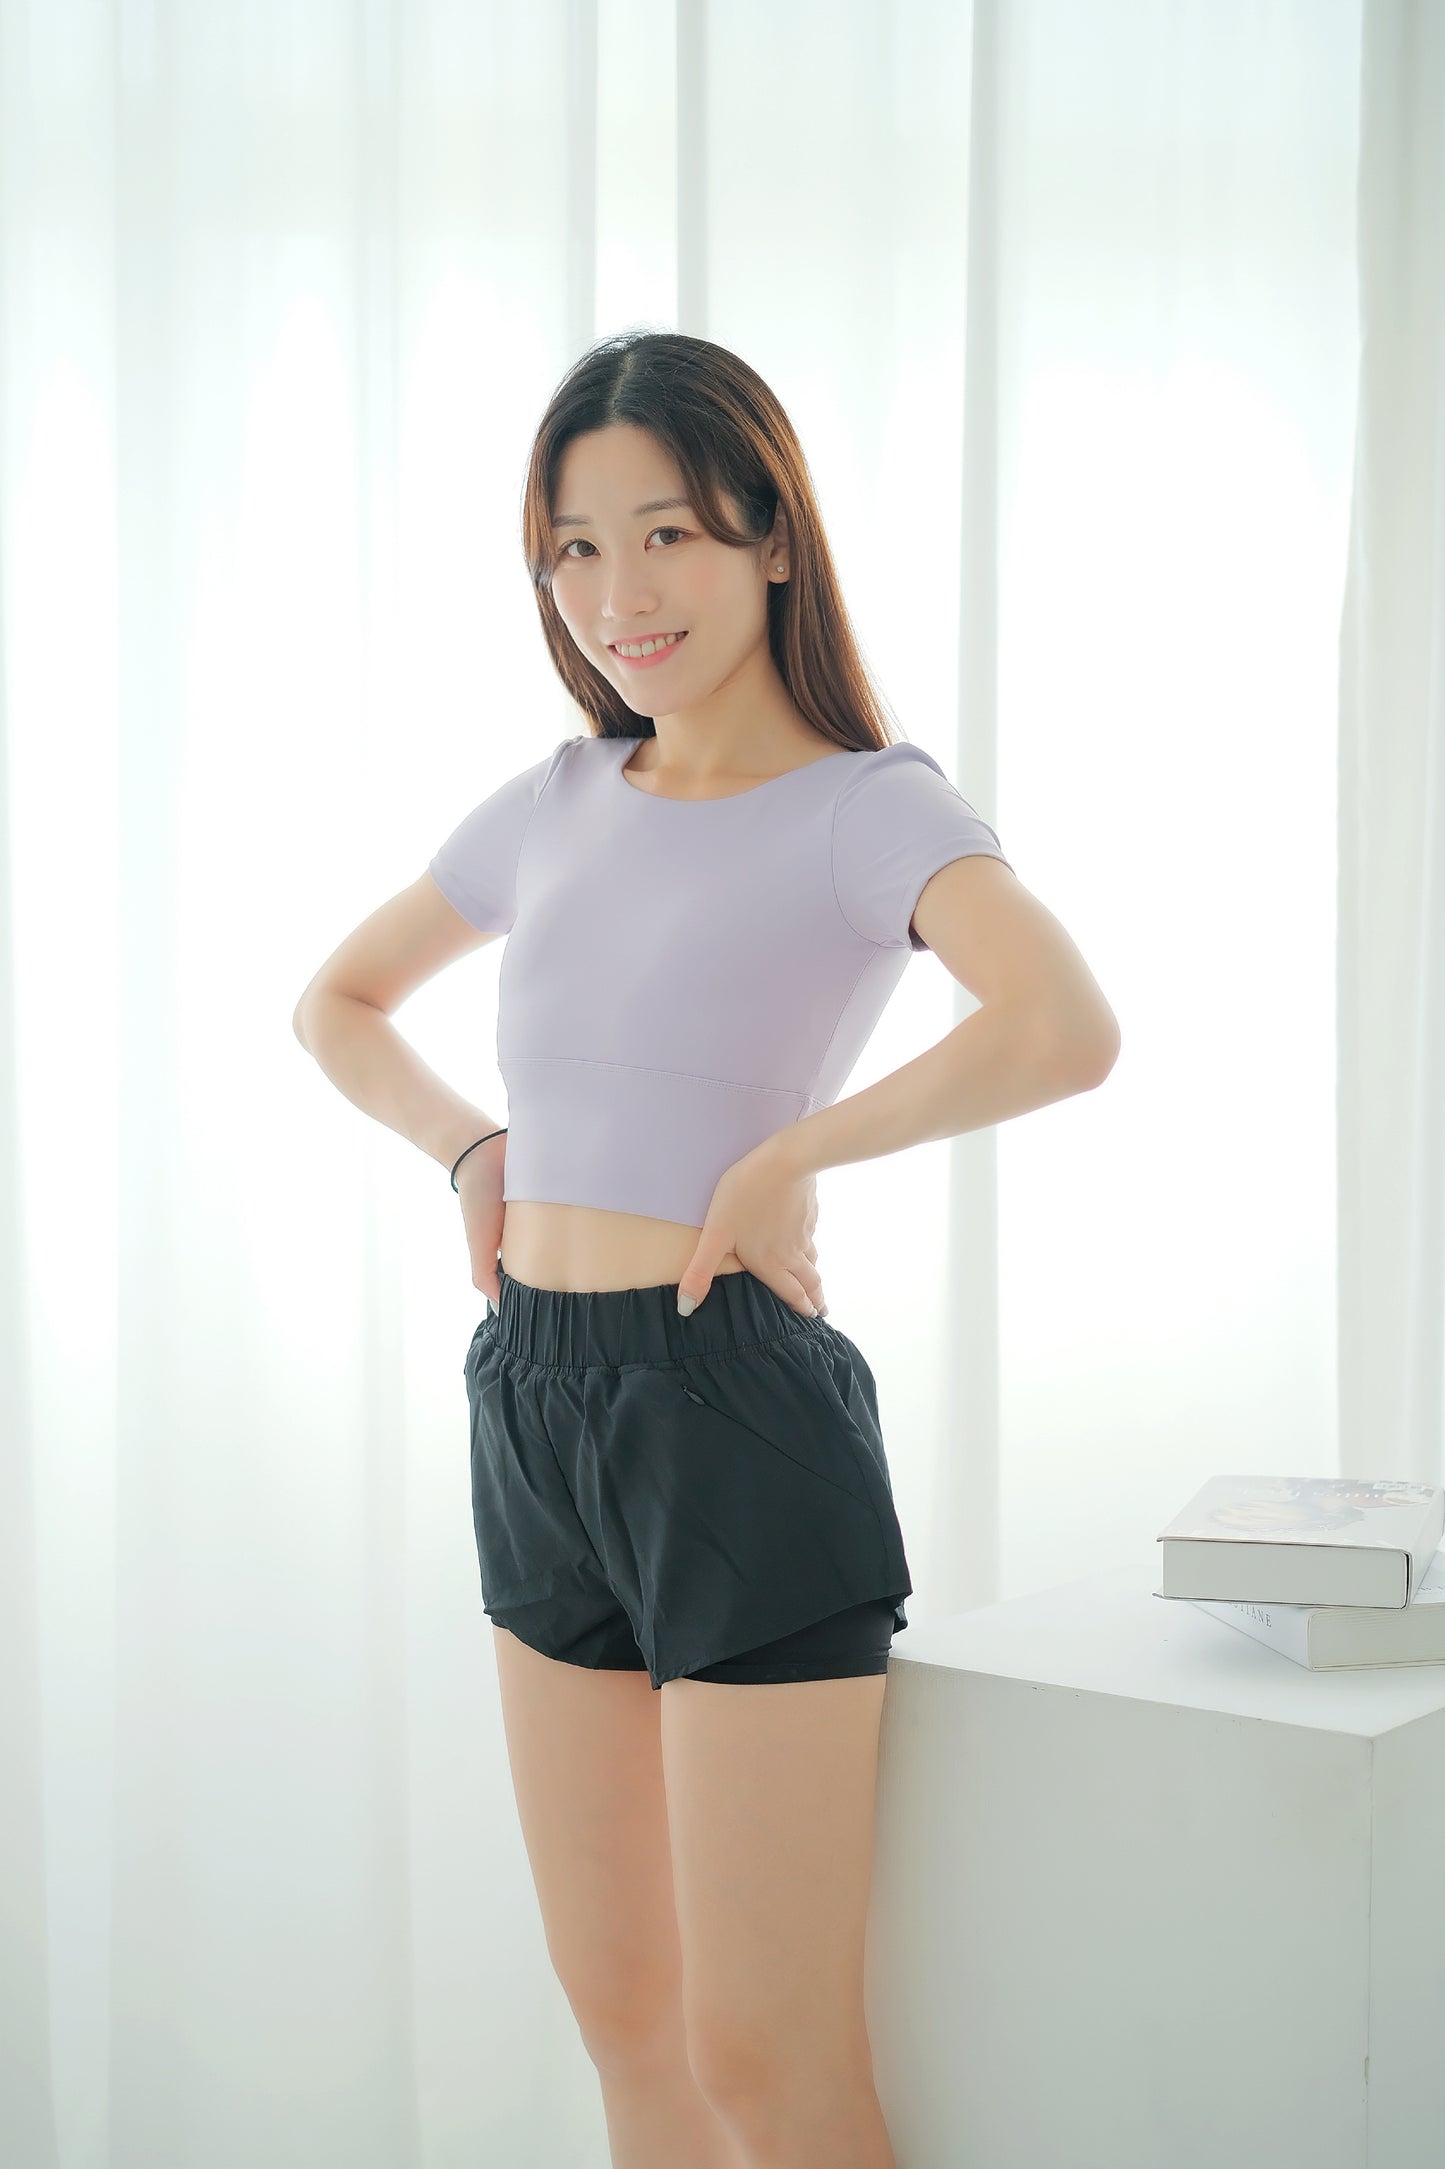 The Two Layers Shorts with Side Pockets